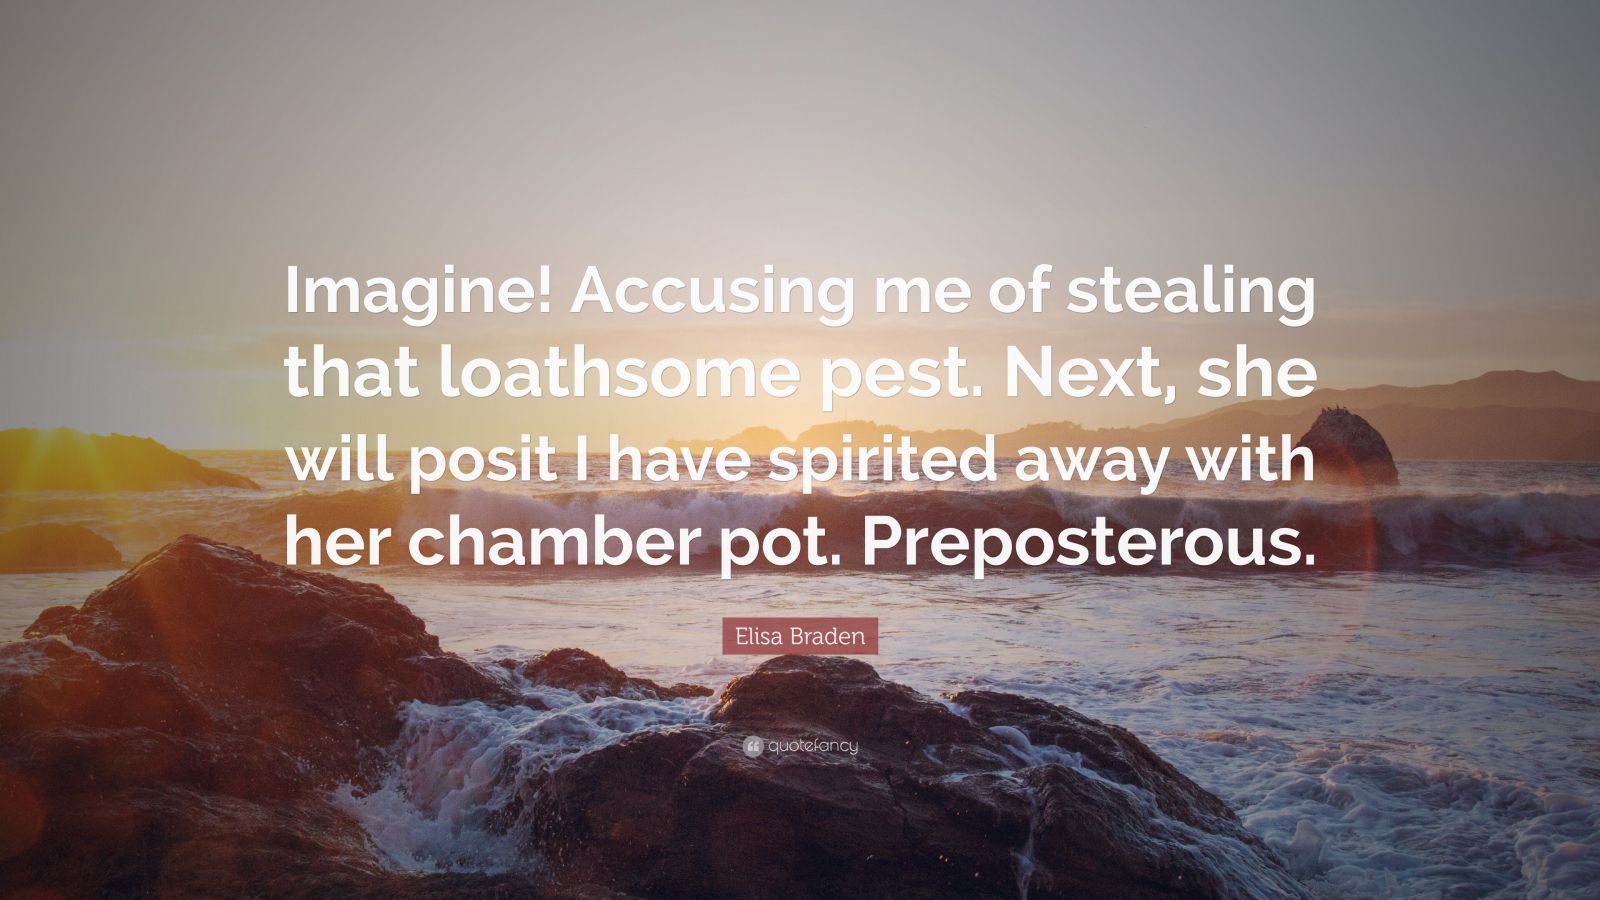 Elisa Braden Quote: “Imagine! Accusing me of stealing that loathsome ...